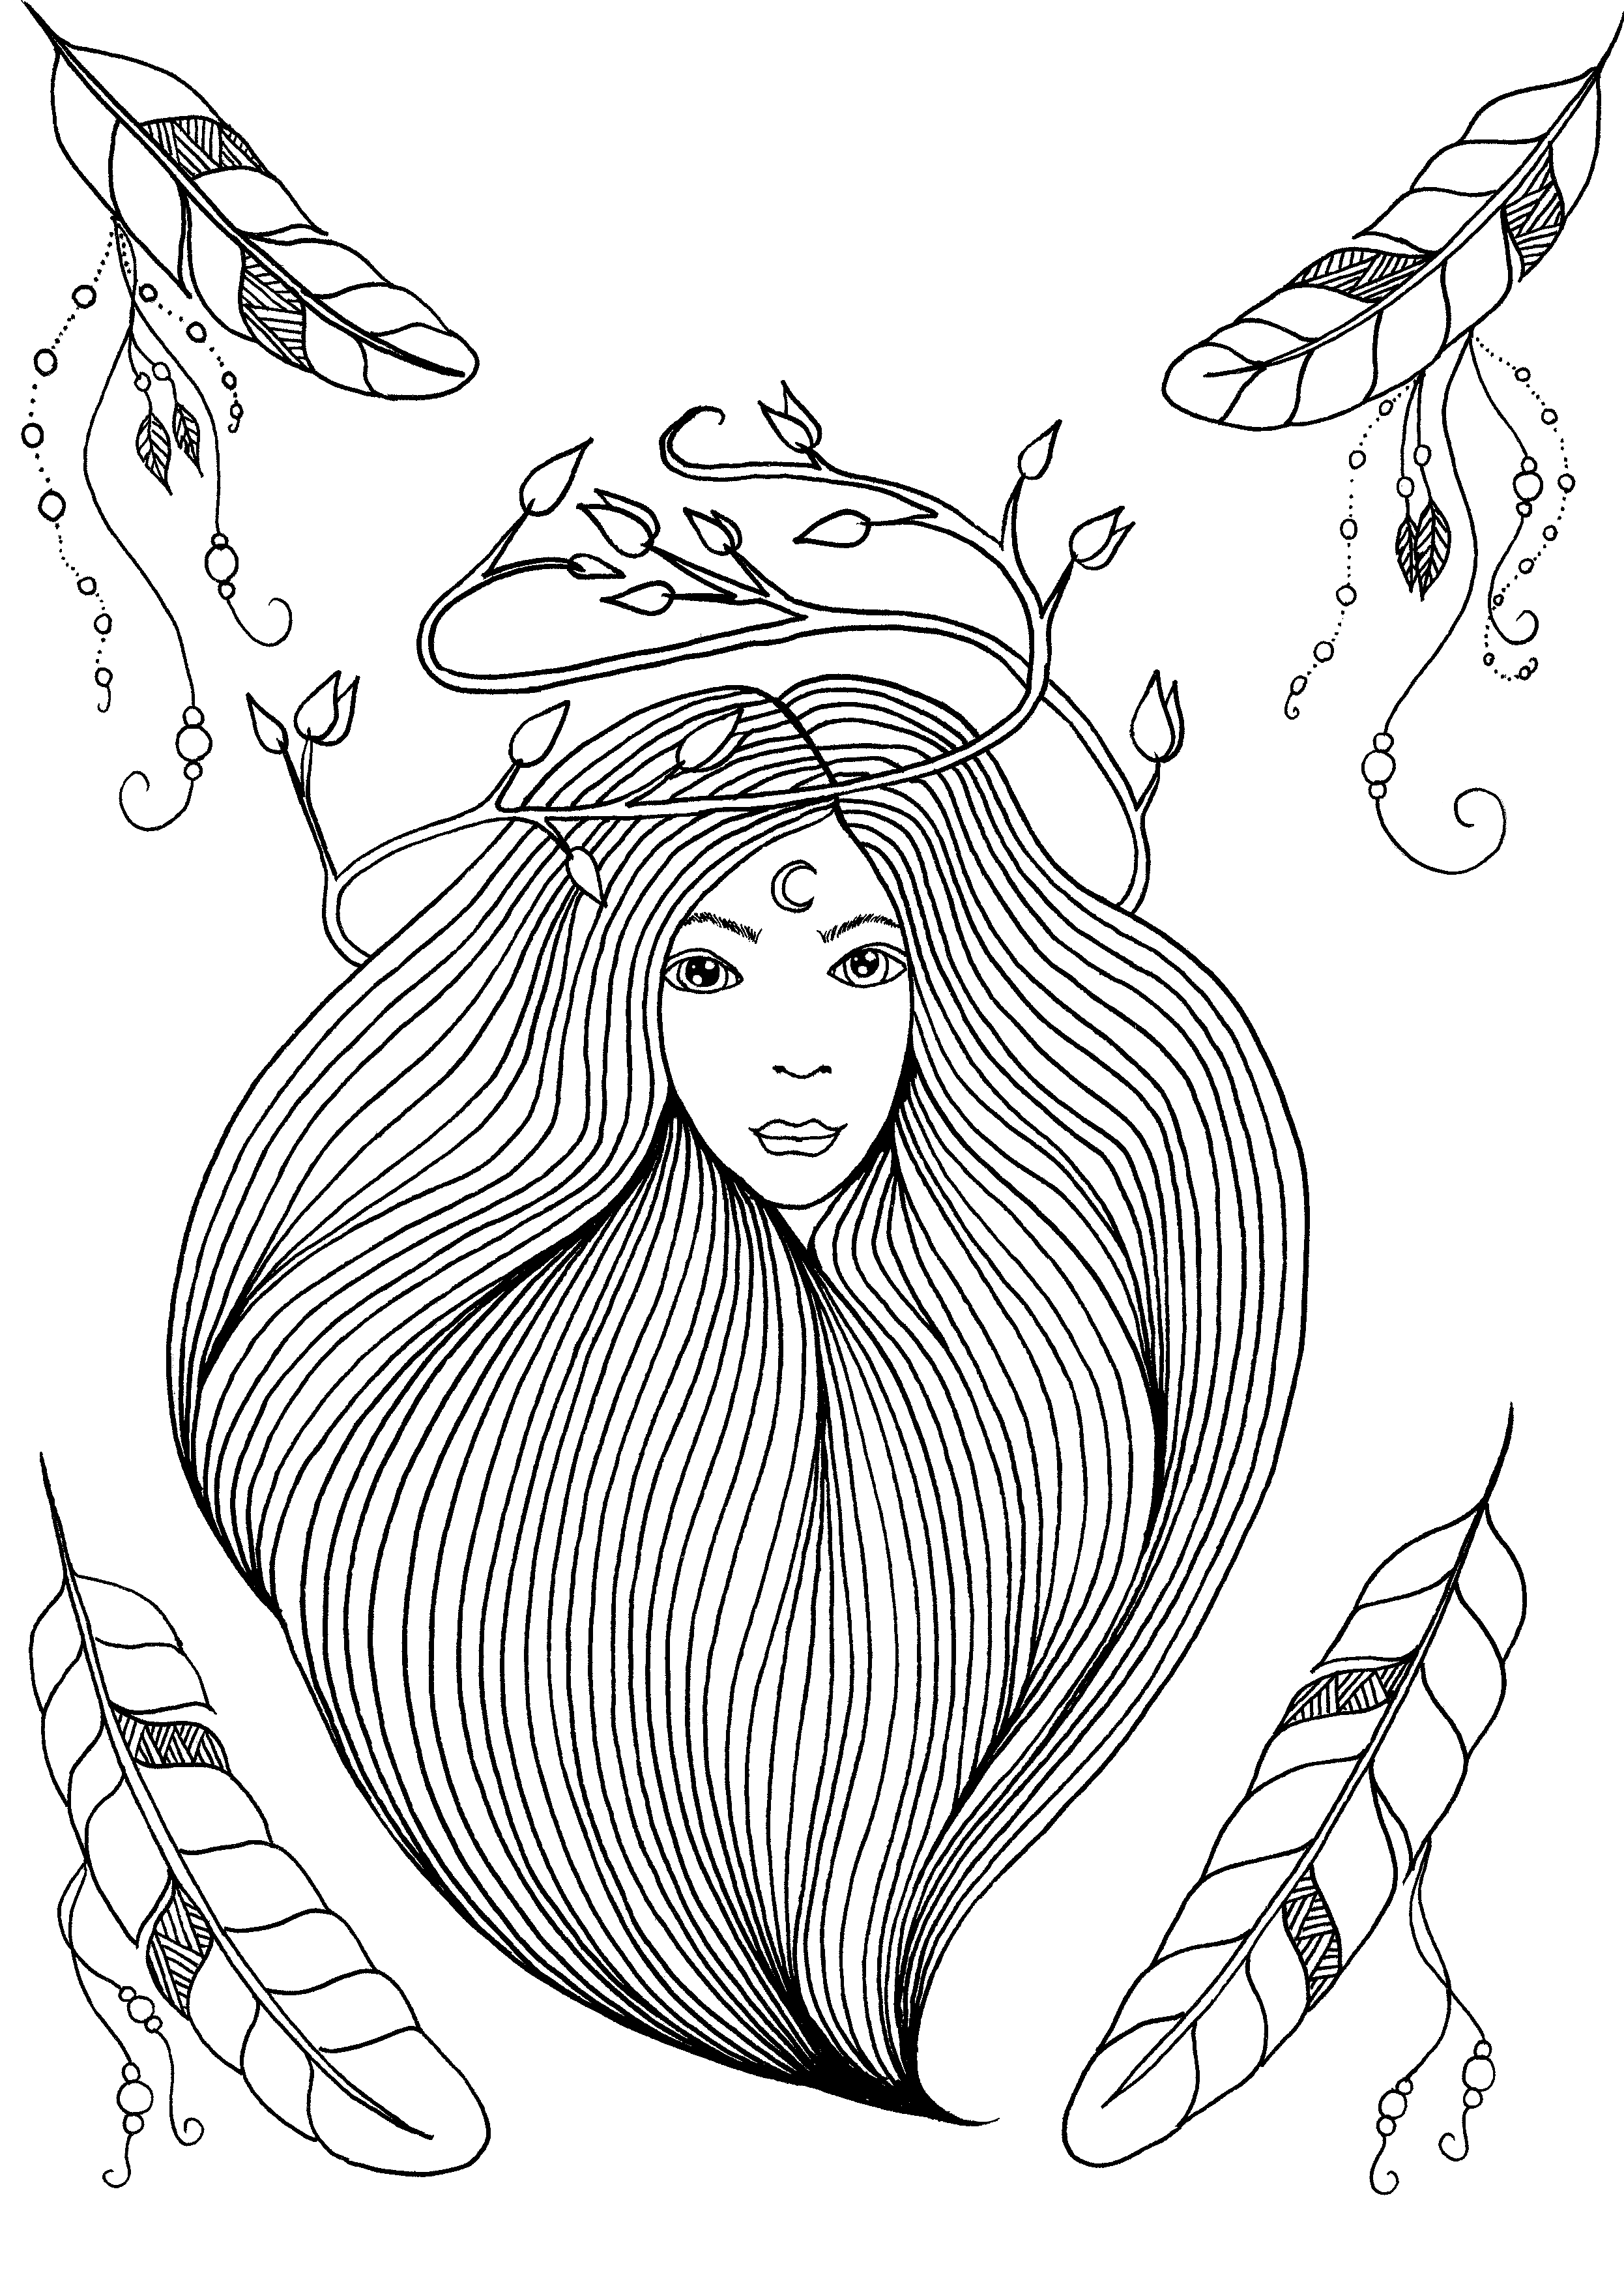 Coloring page of the cover of the Leen Margot's book 'Feathers and Dreams'